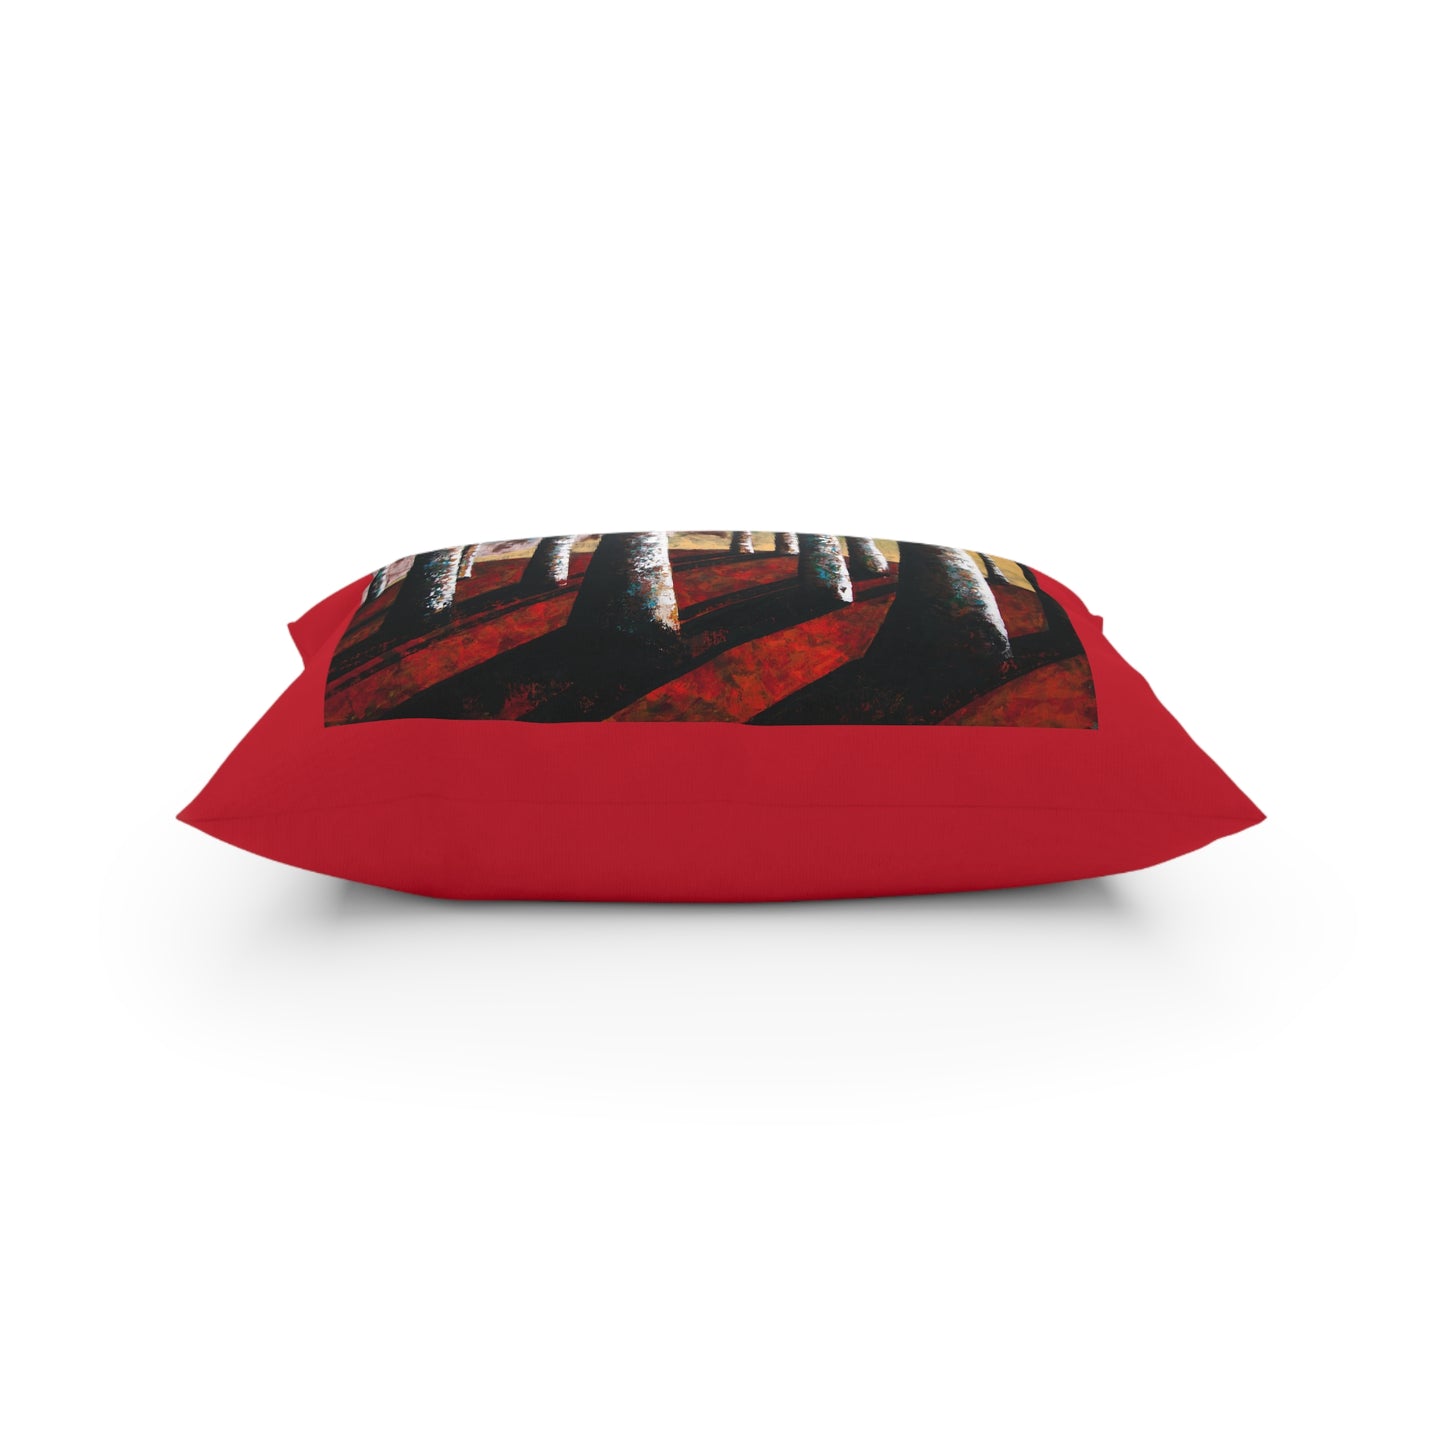 Red Lumber Pillow - Red Throw Pillow - Red Toss Pillow - Red Pillow for couch - At the end of the Day